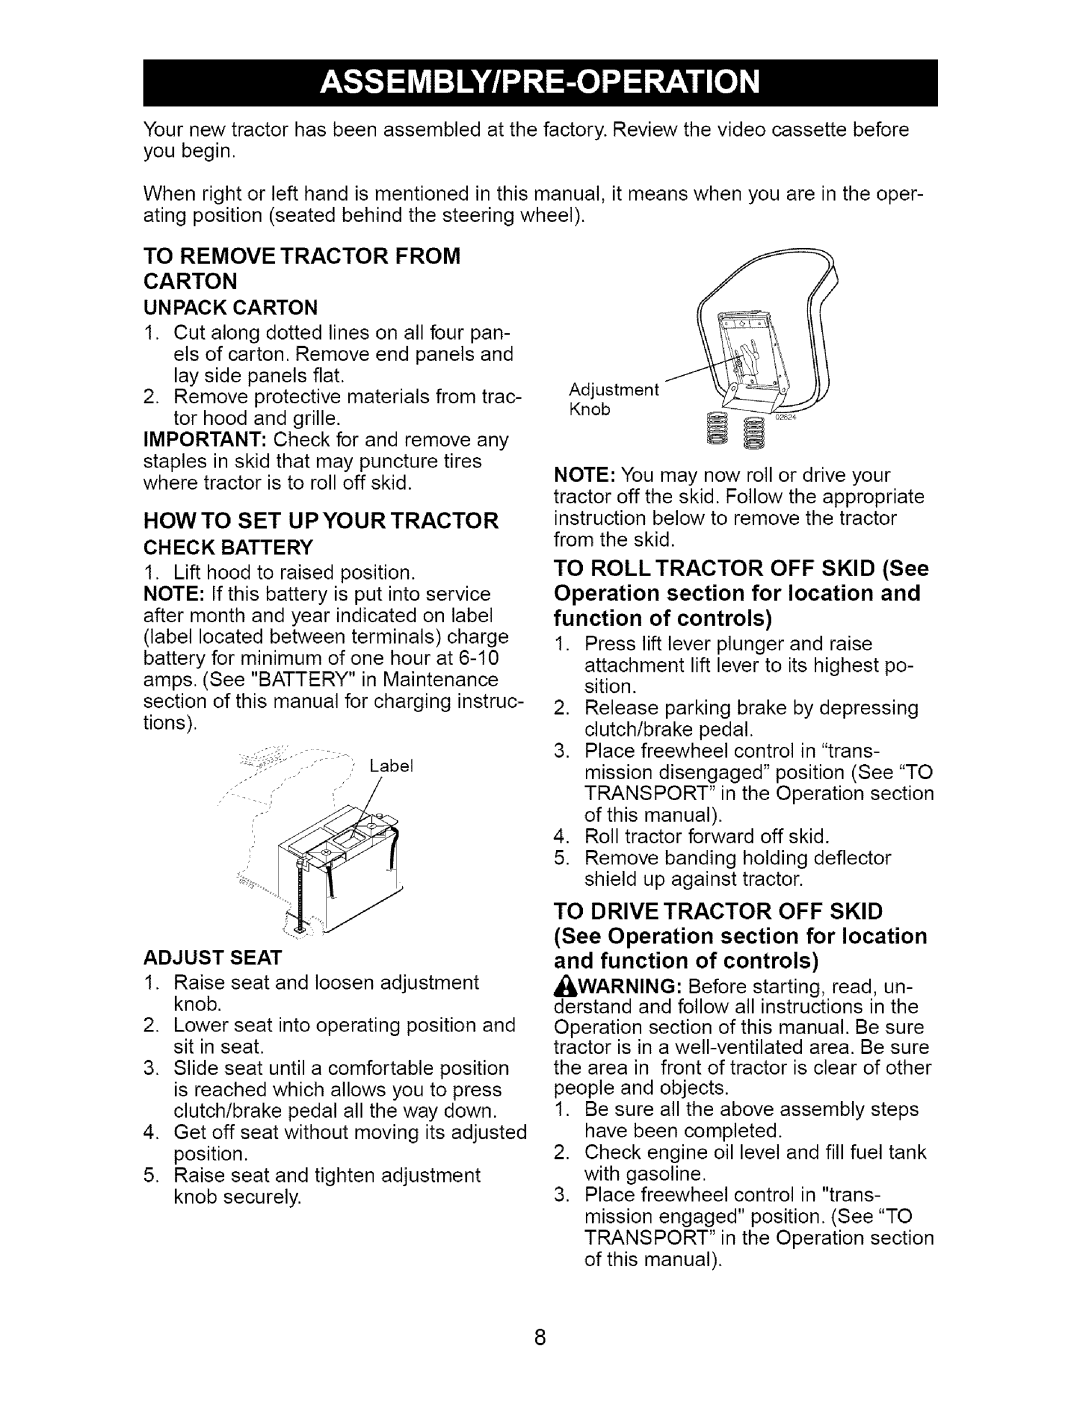 Craftsman 917.273642 manual To Remove Tractor From Carton, To Drive Tractor Off Skid 